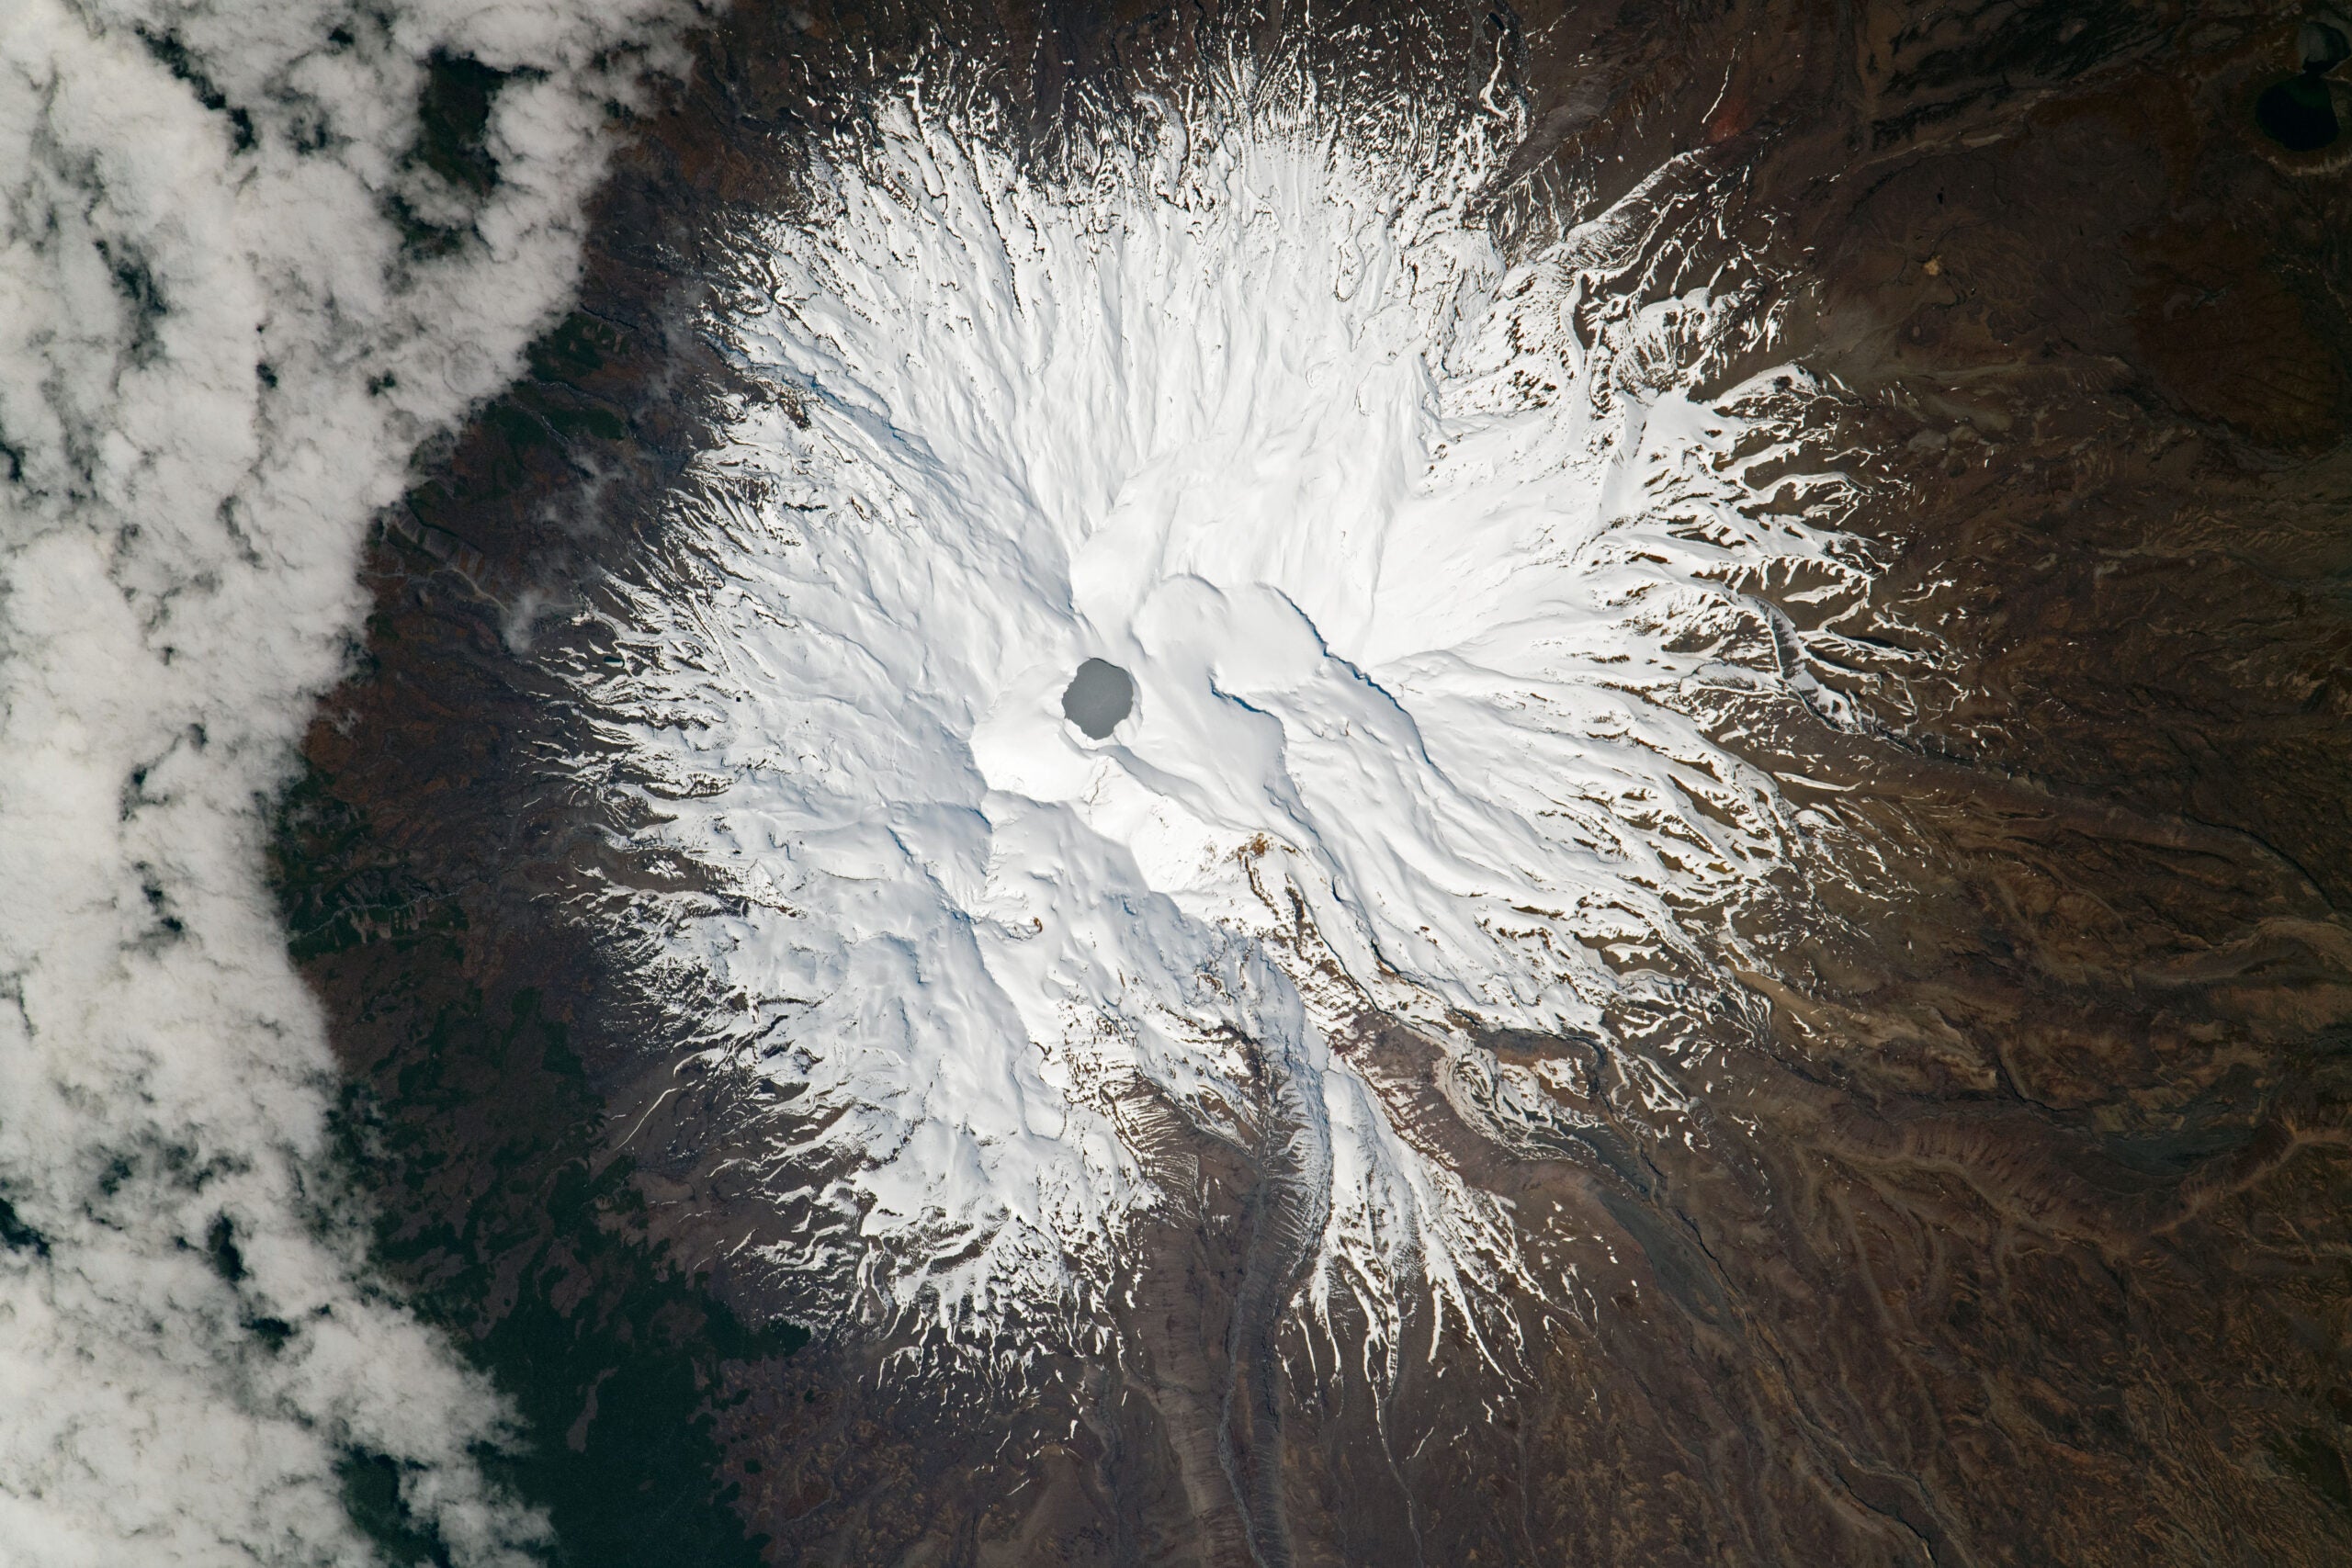 You’ve seen Mount Doom in the movies, now look at it from space